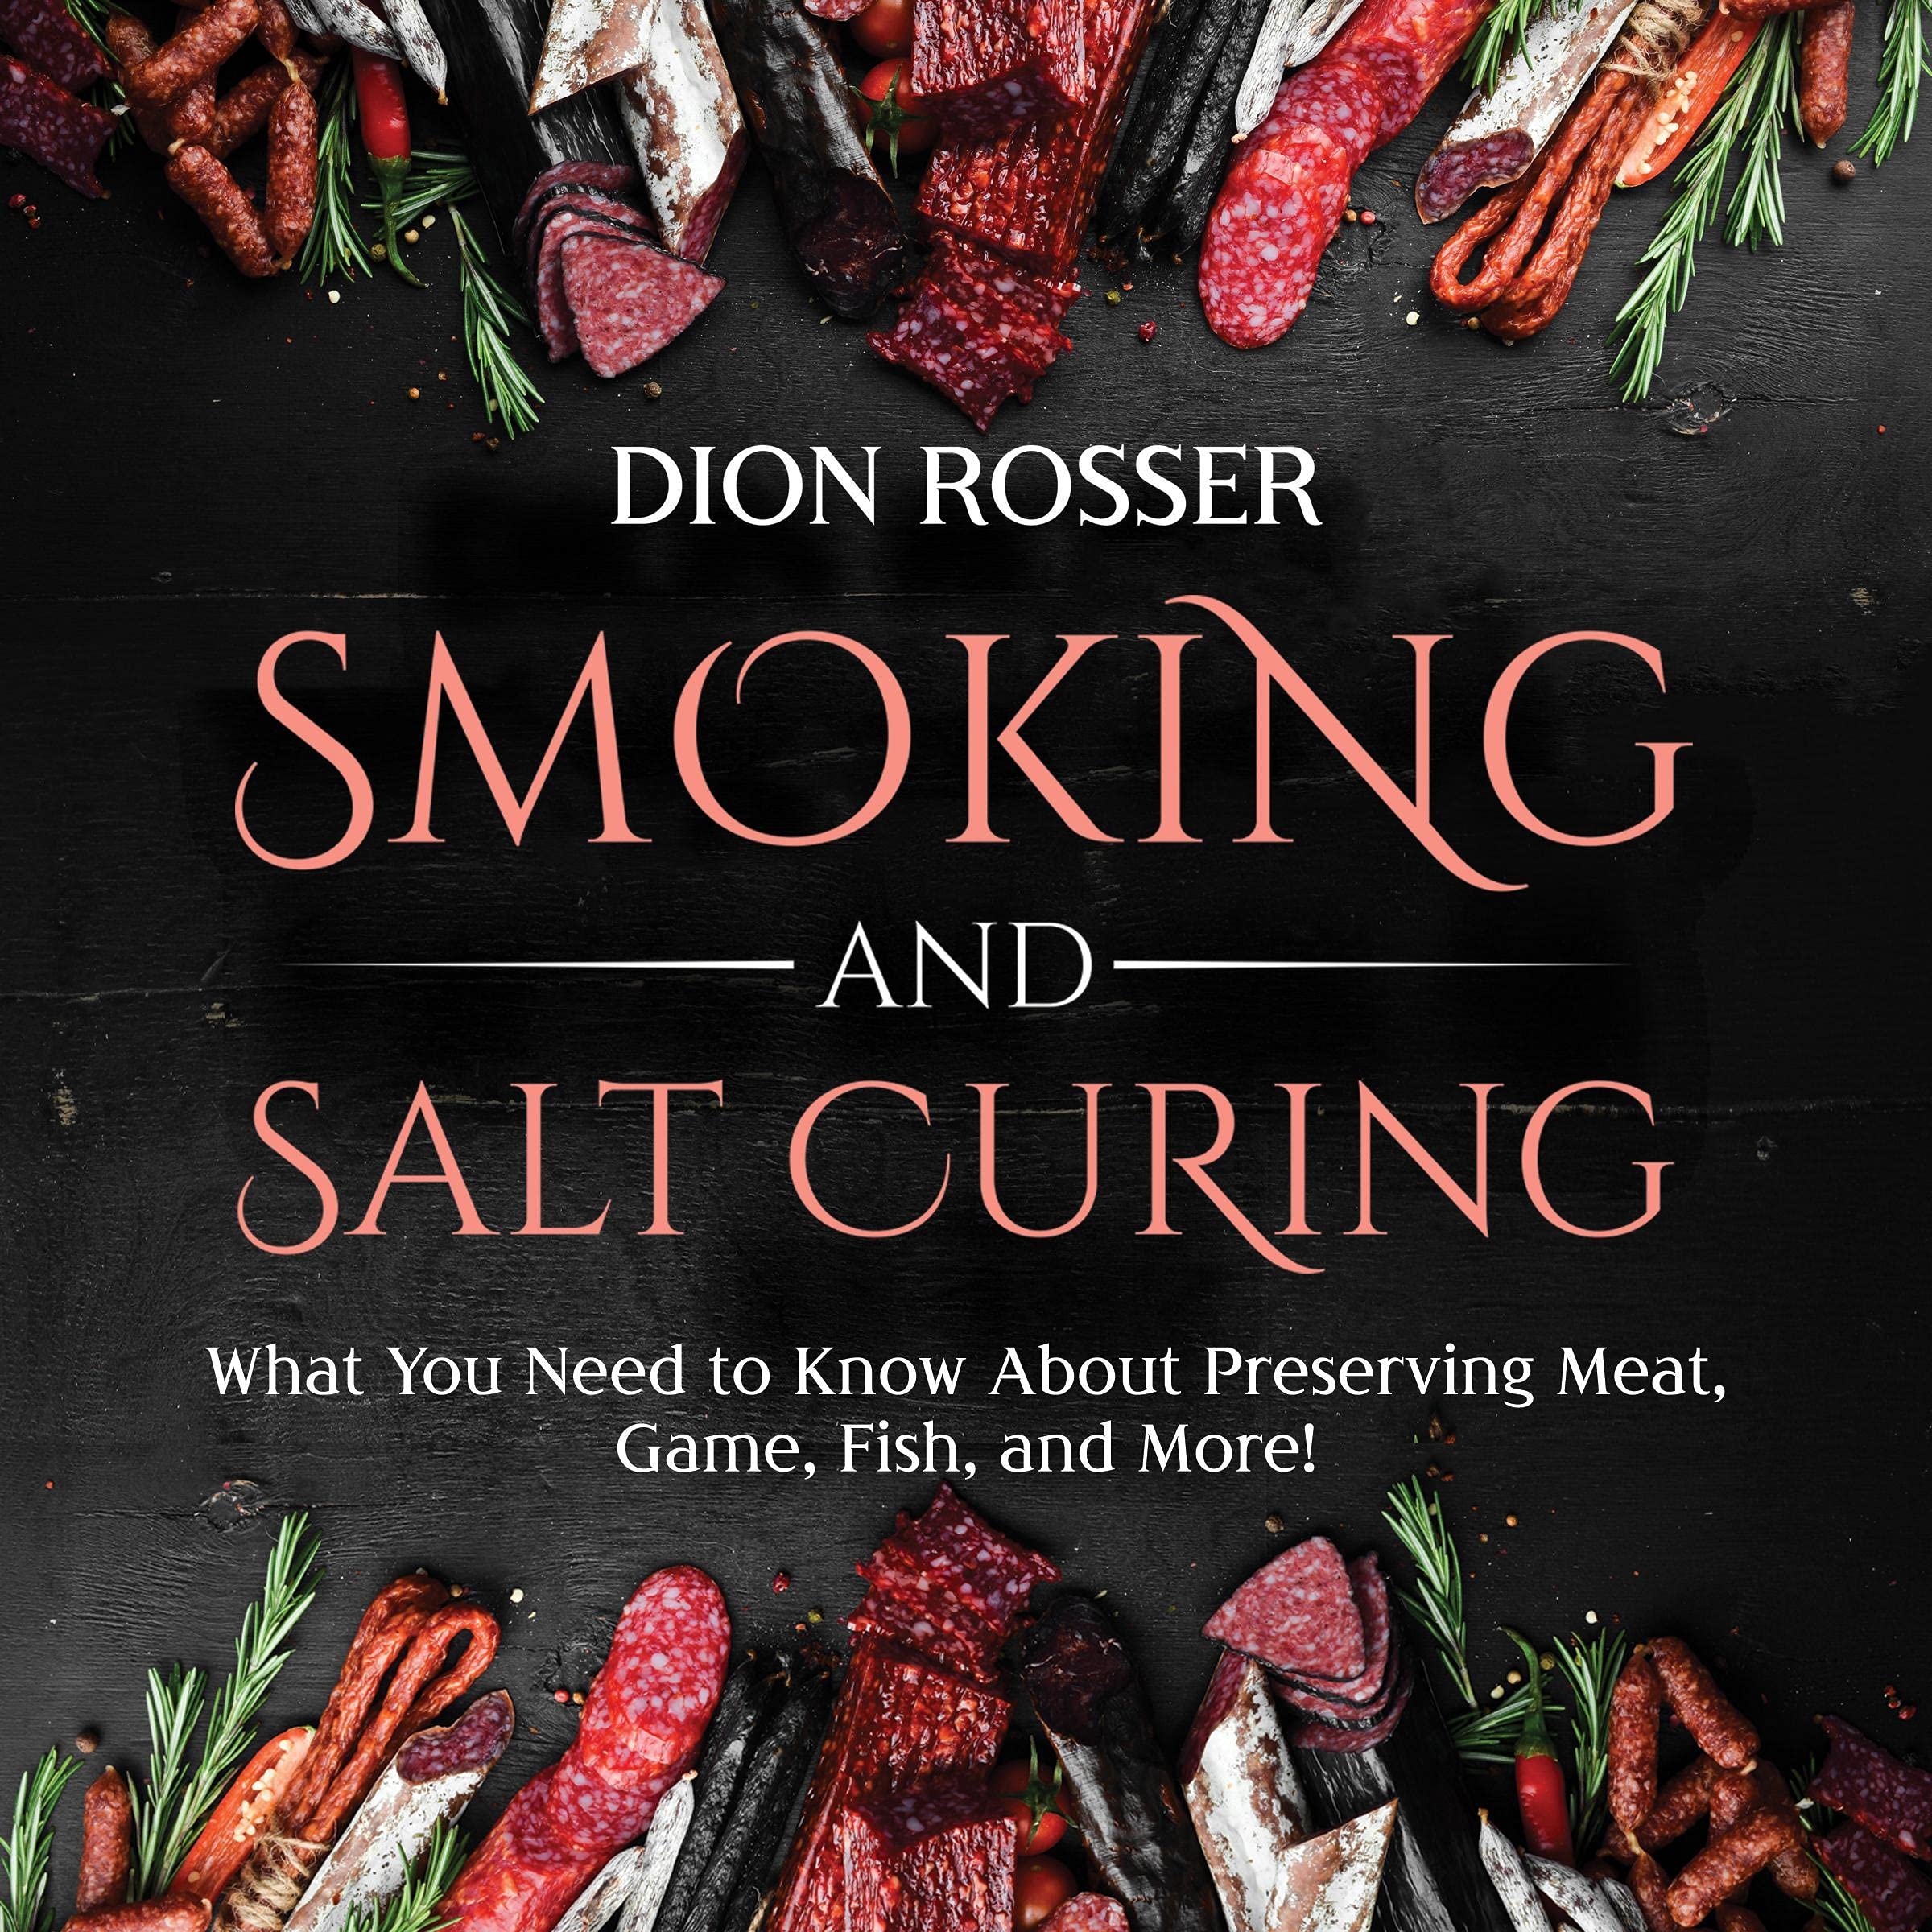 Smoking and Salt Curing: What You Need to Know About Preserving Meat, Game, Fish, and More!